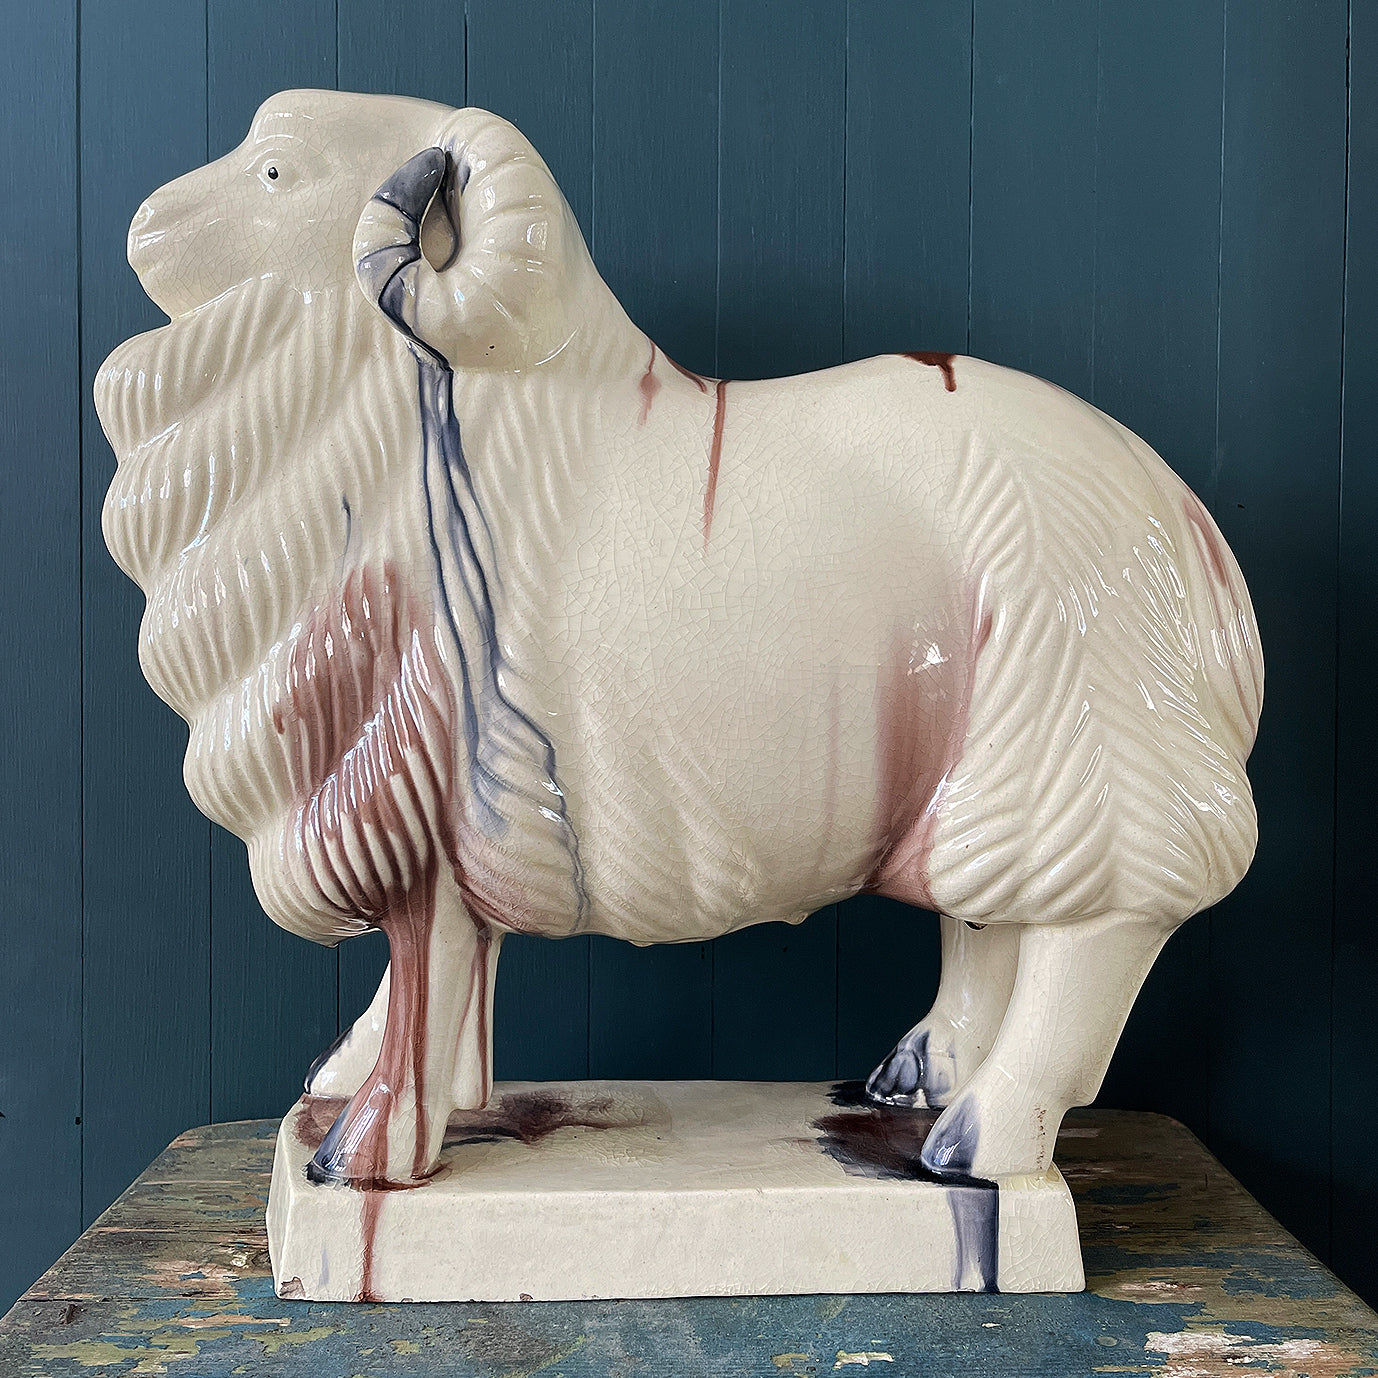 A magnificent, well-modelled Ceramic Glazed Ram with a crackle glaze finish and dribbled colours. He is stamped on his base with a Chinese mark and is of hollow construction. He makes a wonderful striking decorative piece - SHOP NOW - www.intovintage.co.uk